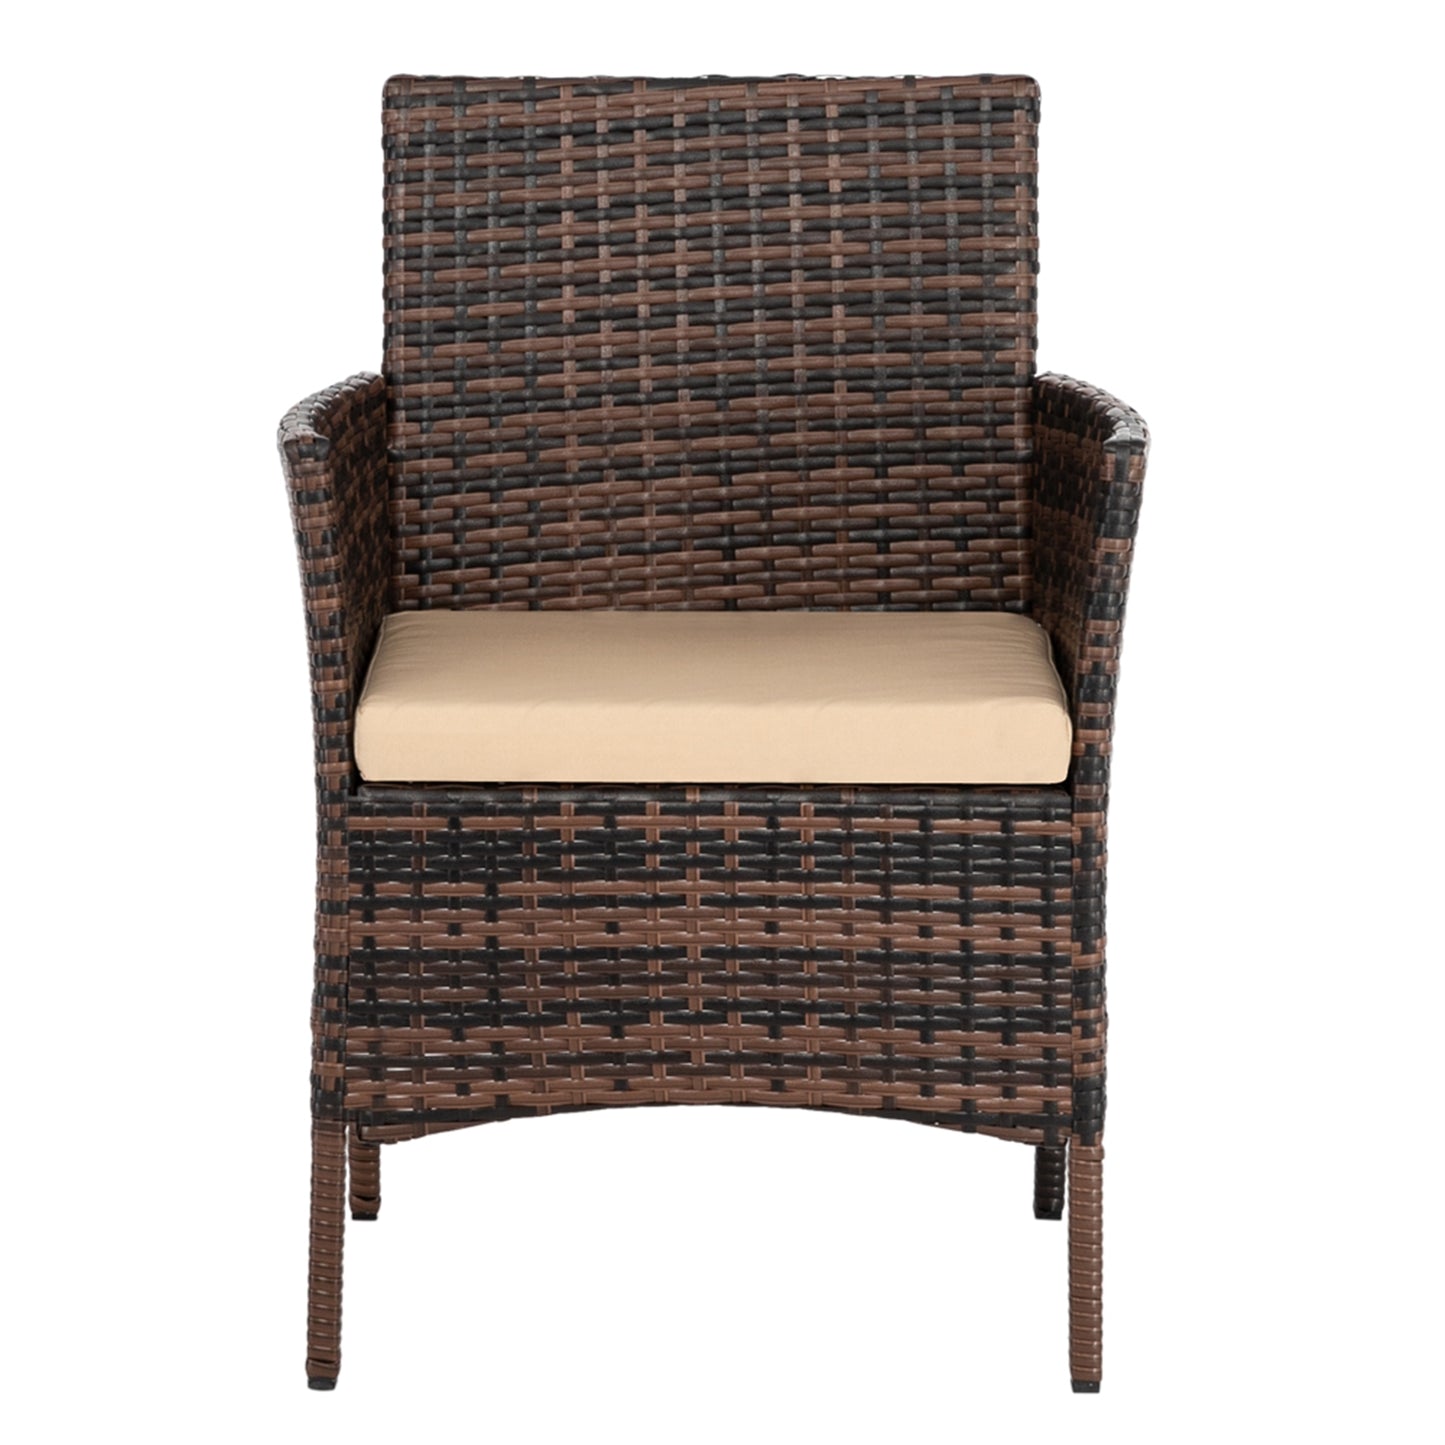 3 Seat Rattan and Coffee Table Set - Brown